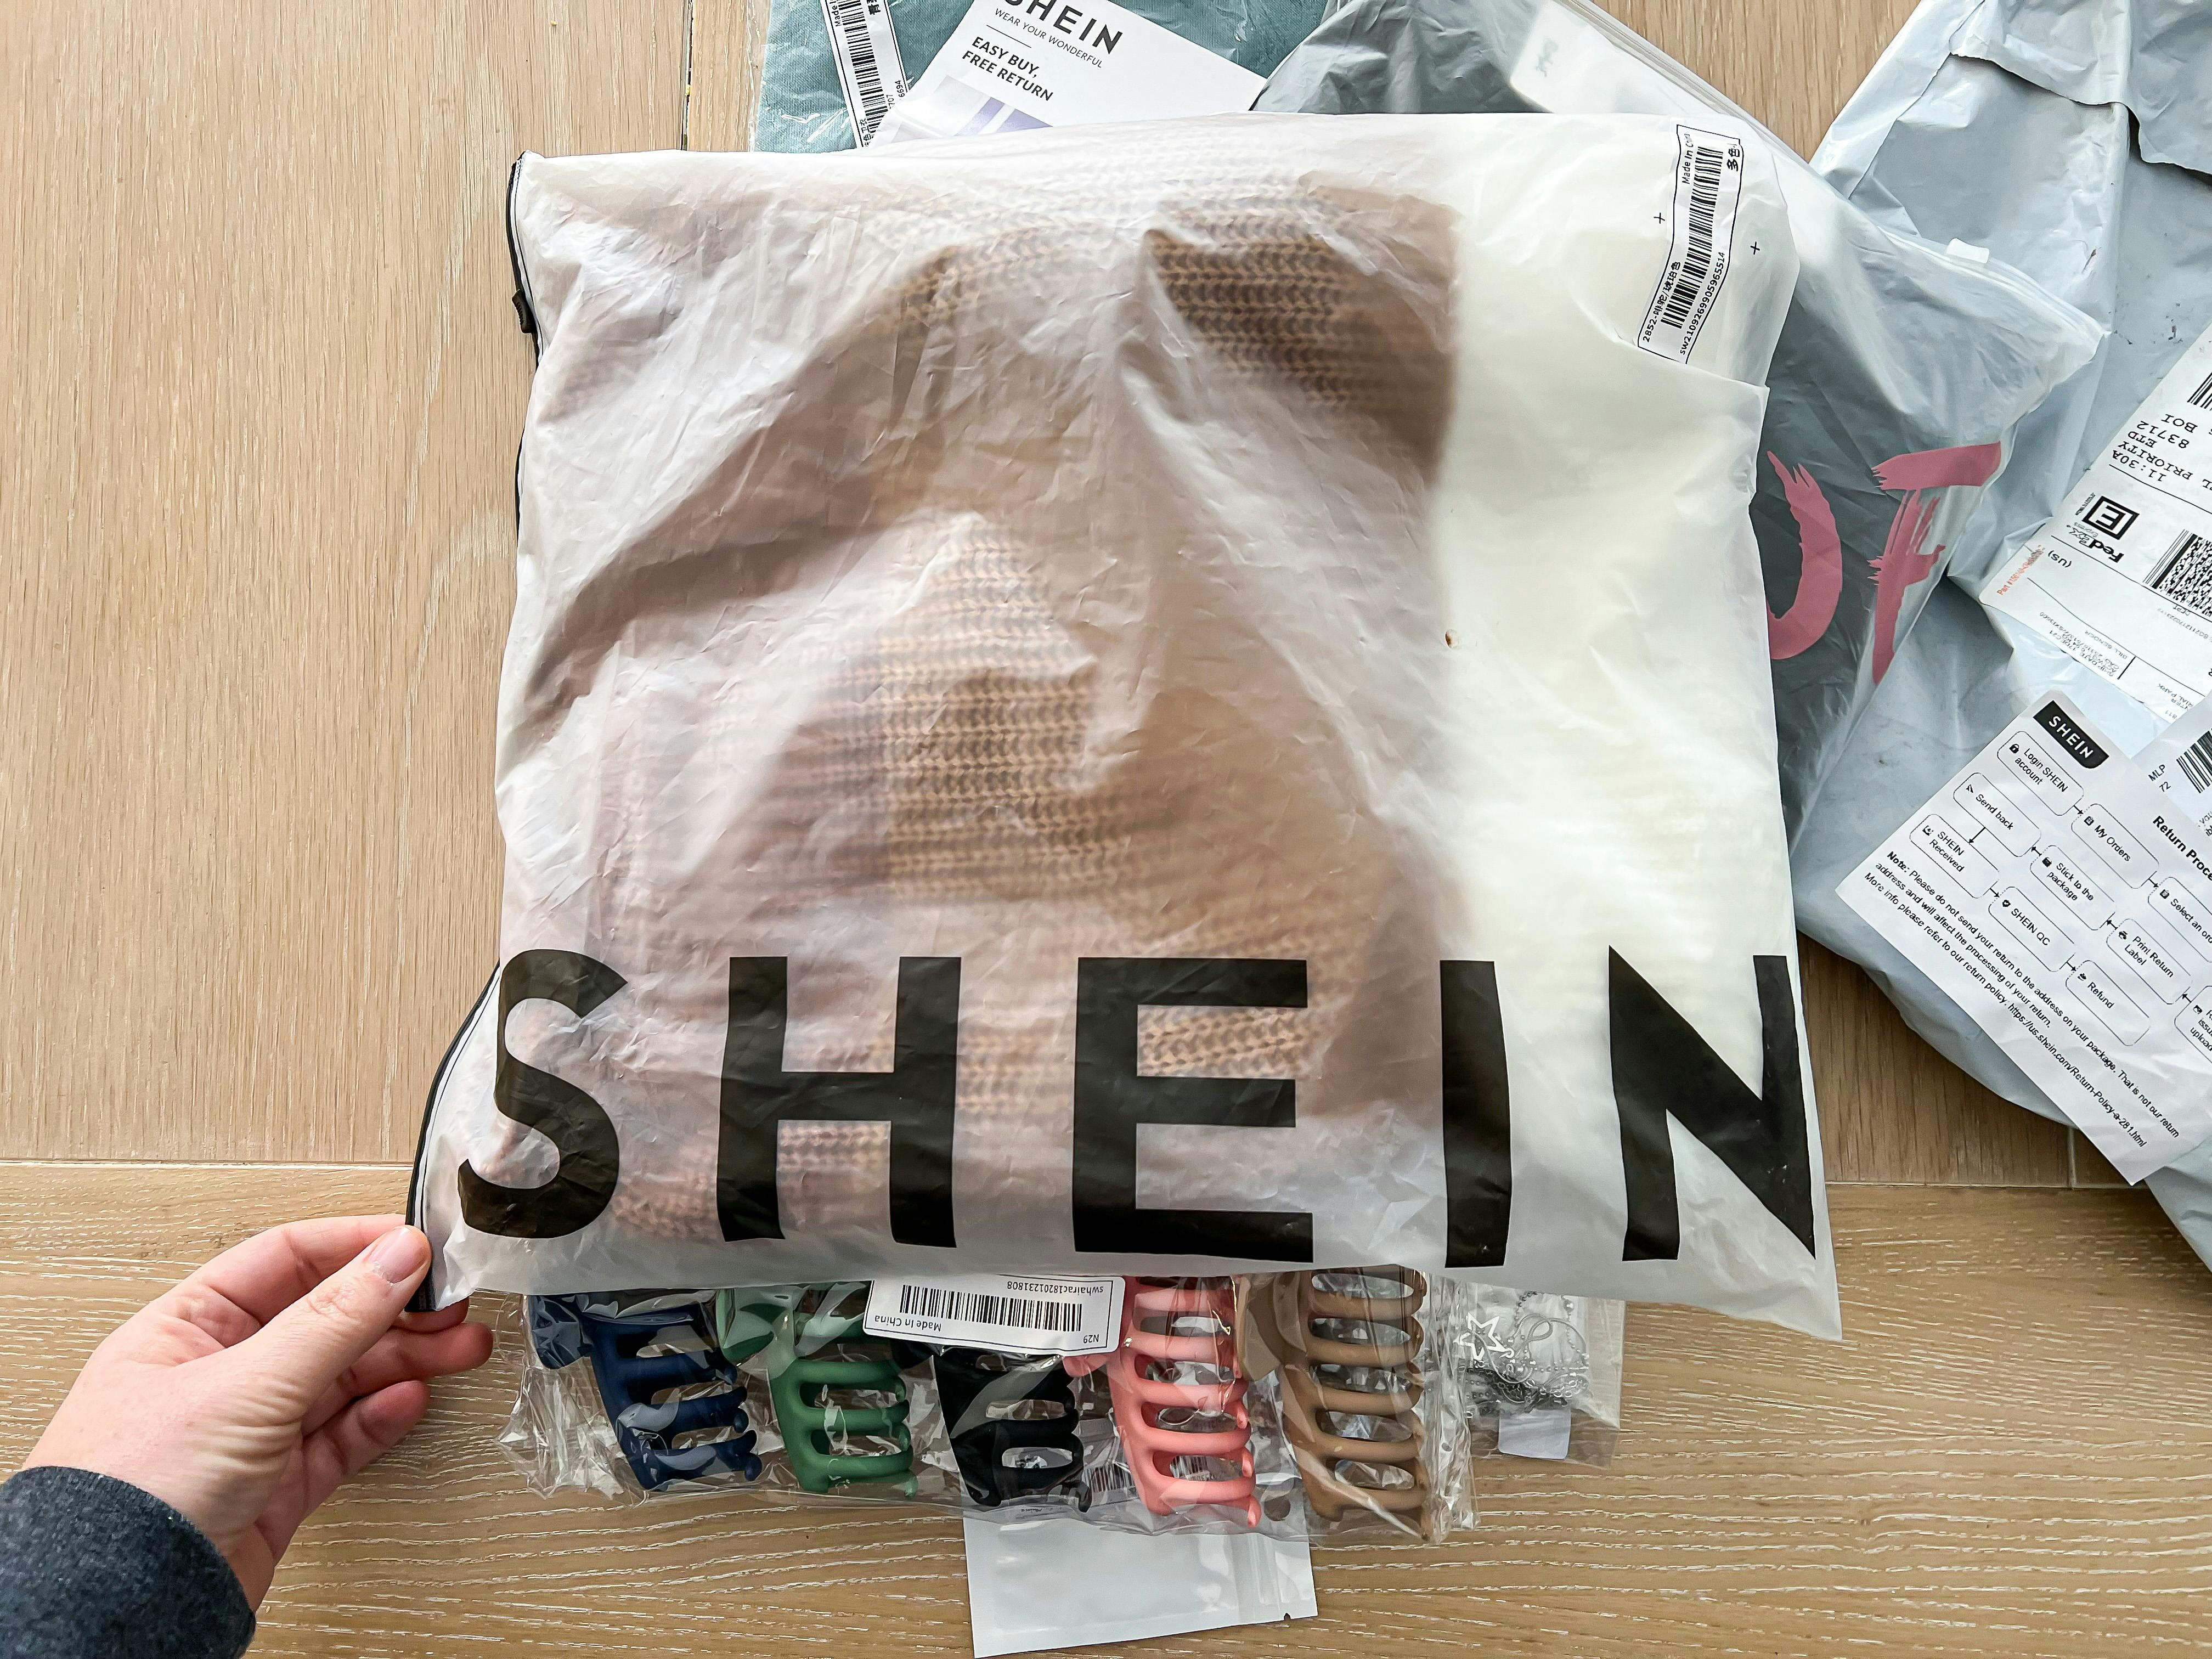 SheIn Exchange: 10 Things to Know First - The Krazy Coupon Lady